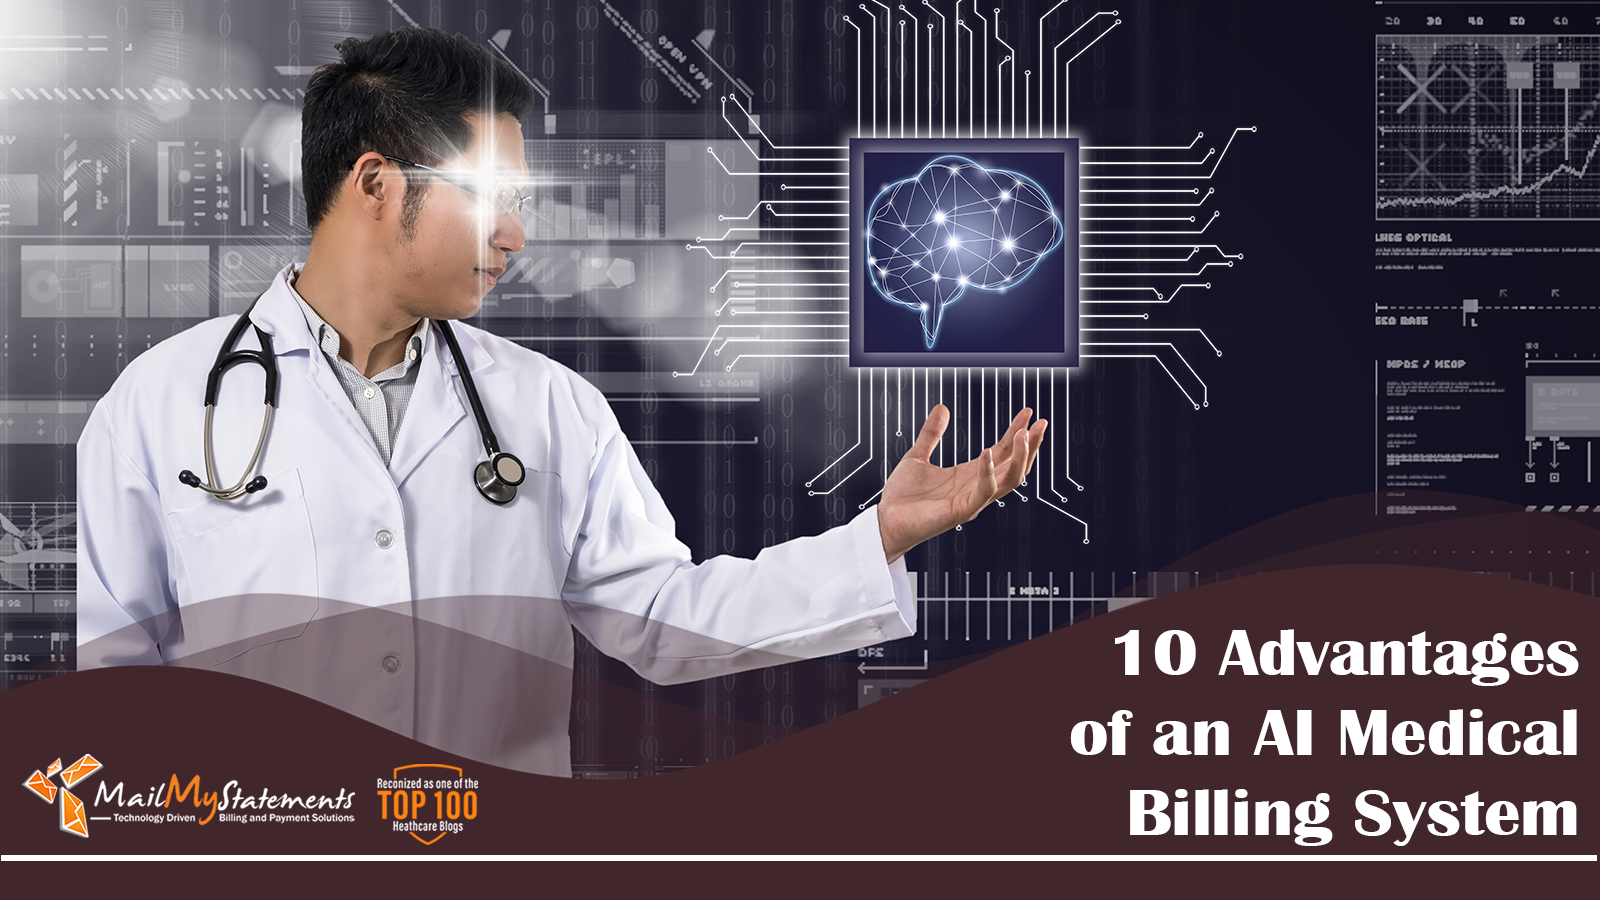 10 Advantages of an AI Medical Billing System